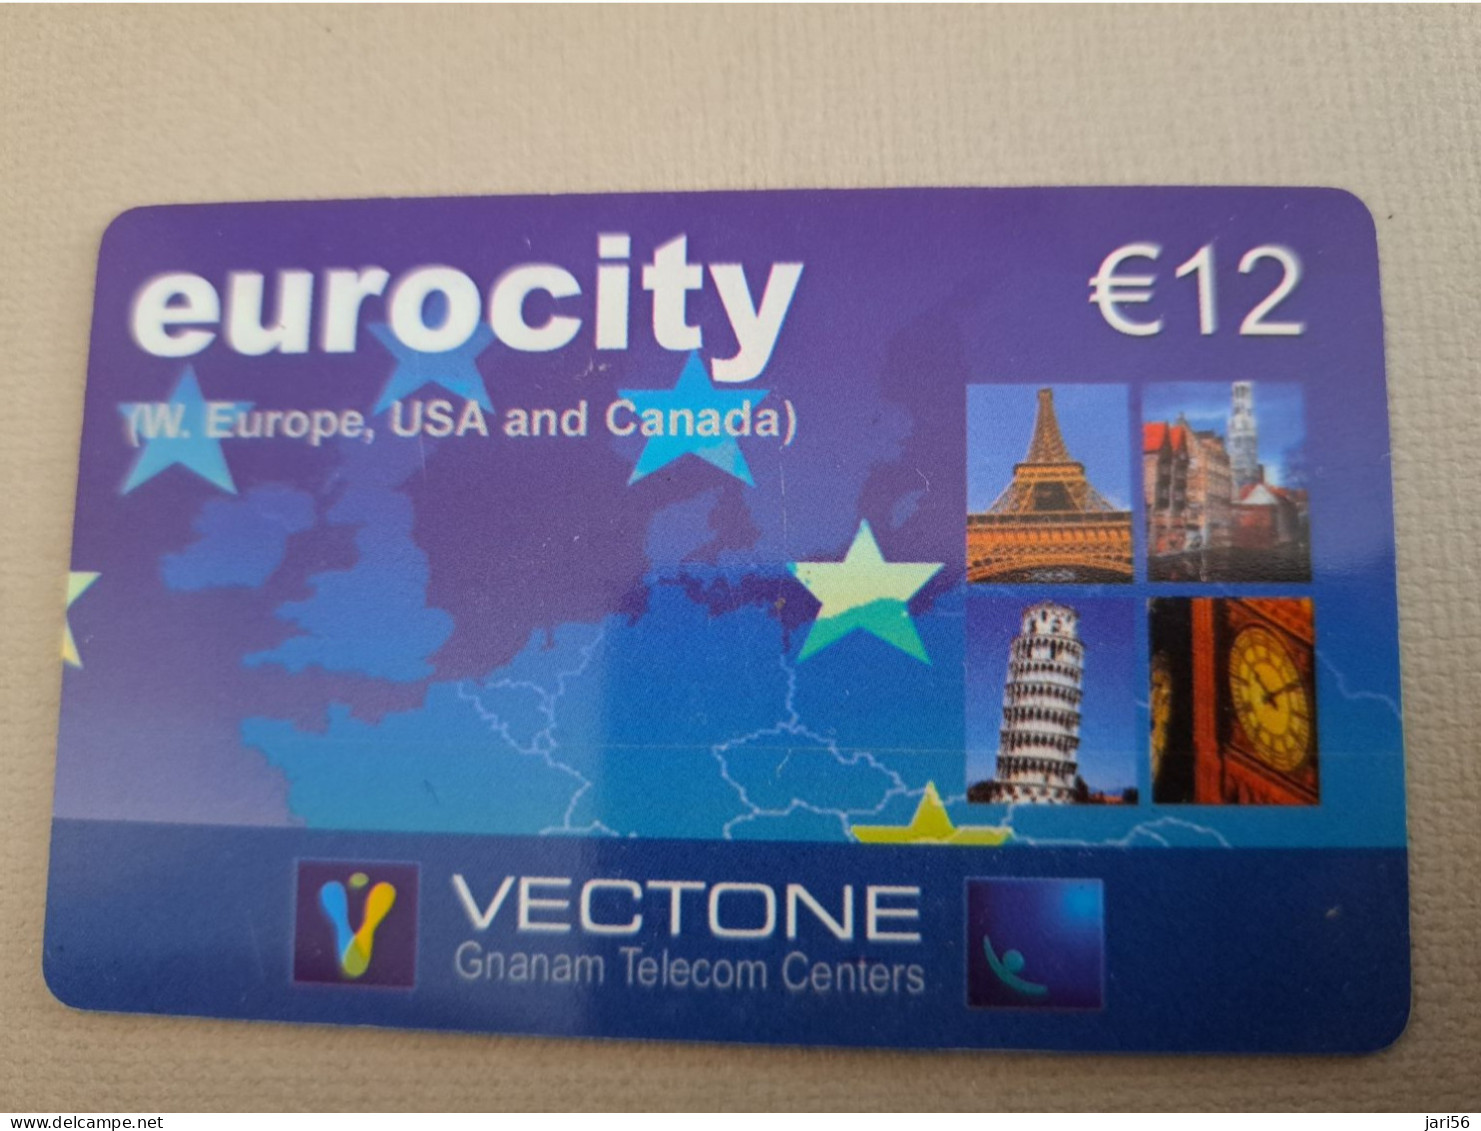 NETHERLANDS /  PREPAID /  VECTONE/ EUROCITY / FAMOUS STATUE   /  € 12,-/  USED  ** 15291** - Private